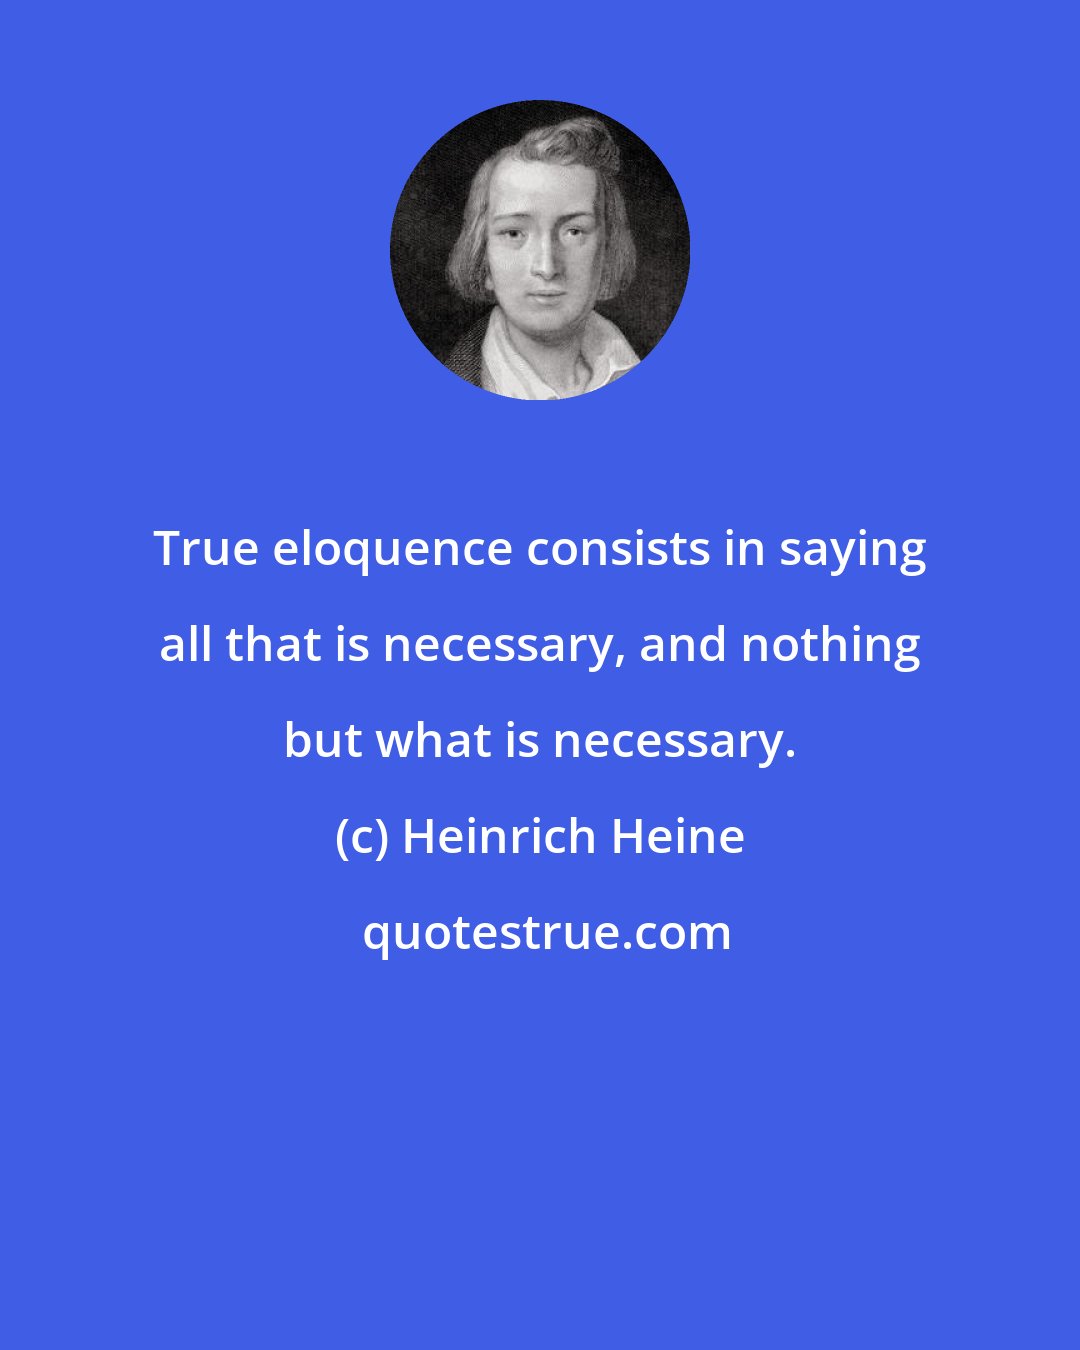 Heinrich Heine: True eloquence consists in saying all that is necessary, and nothing but what is necessary.